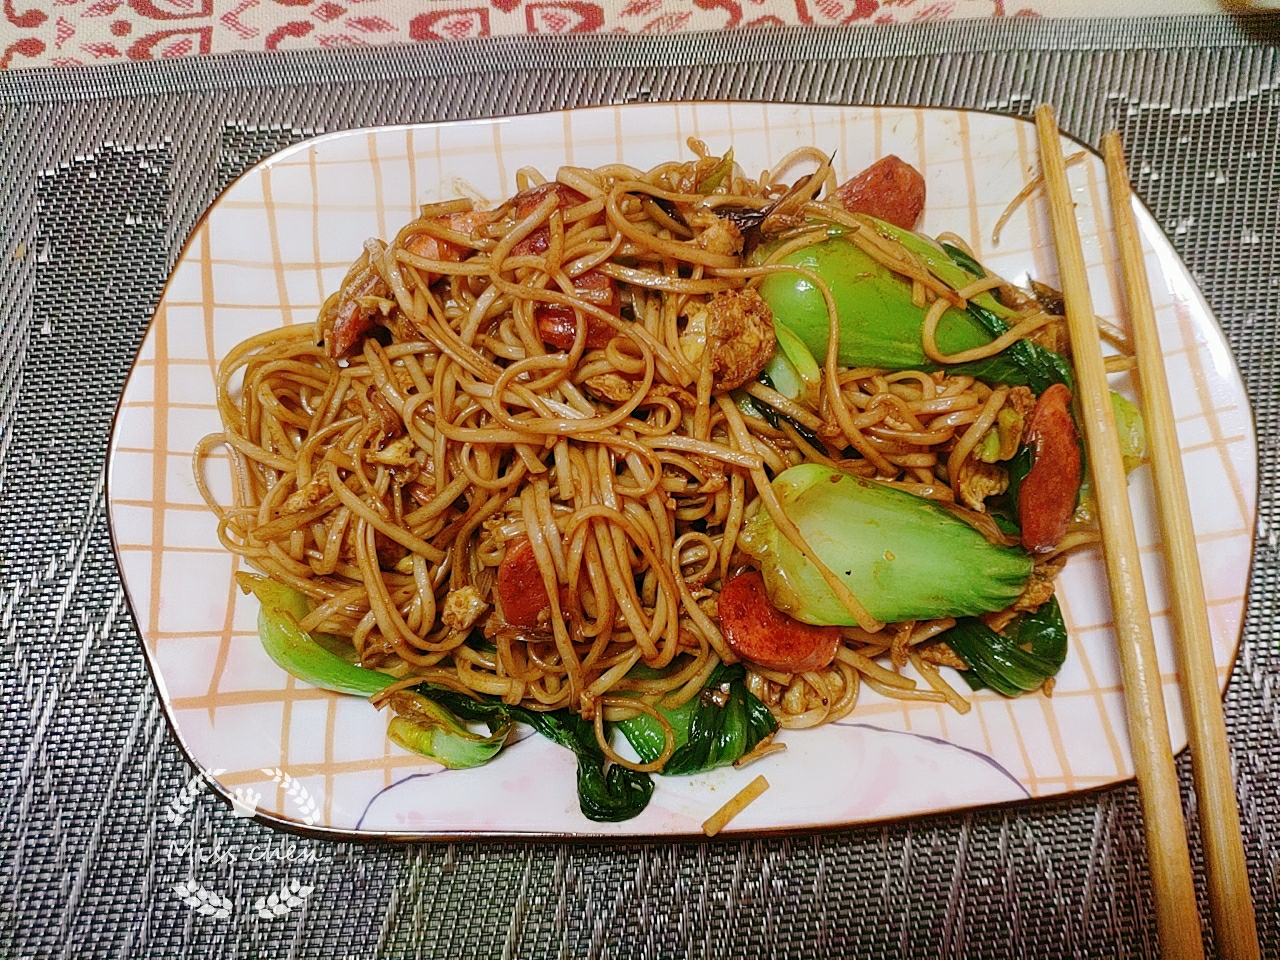 
The practice of chow mien, how is chow mien done delicious